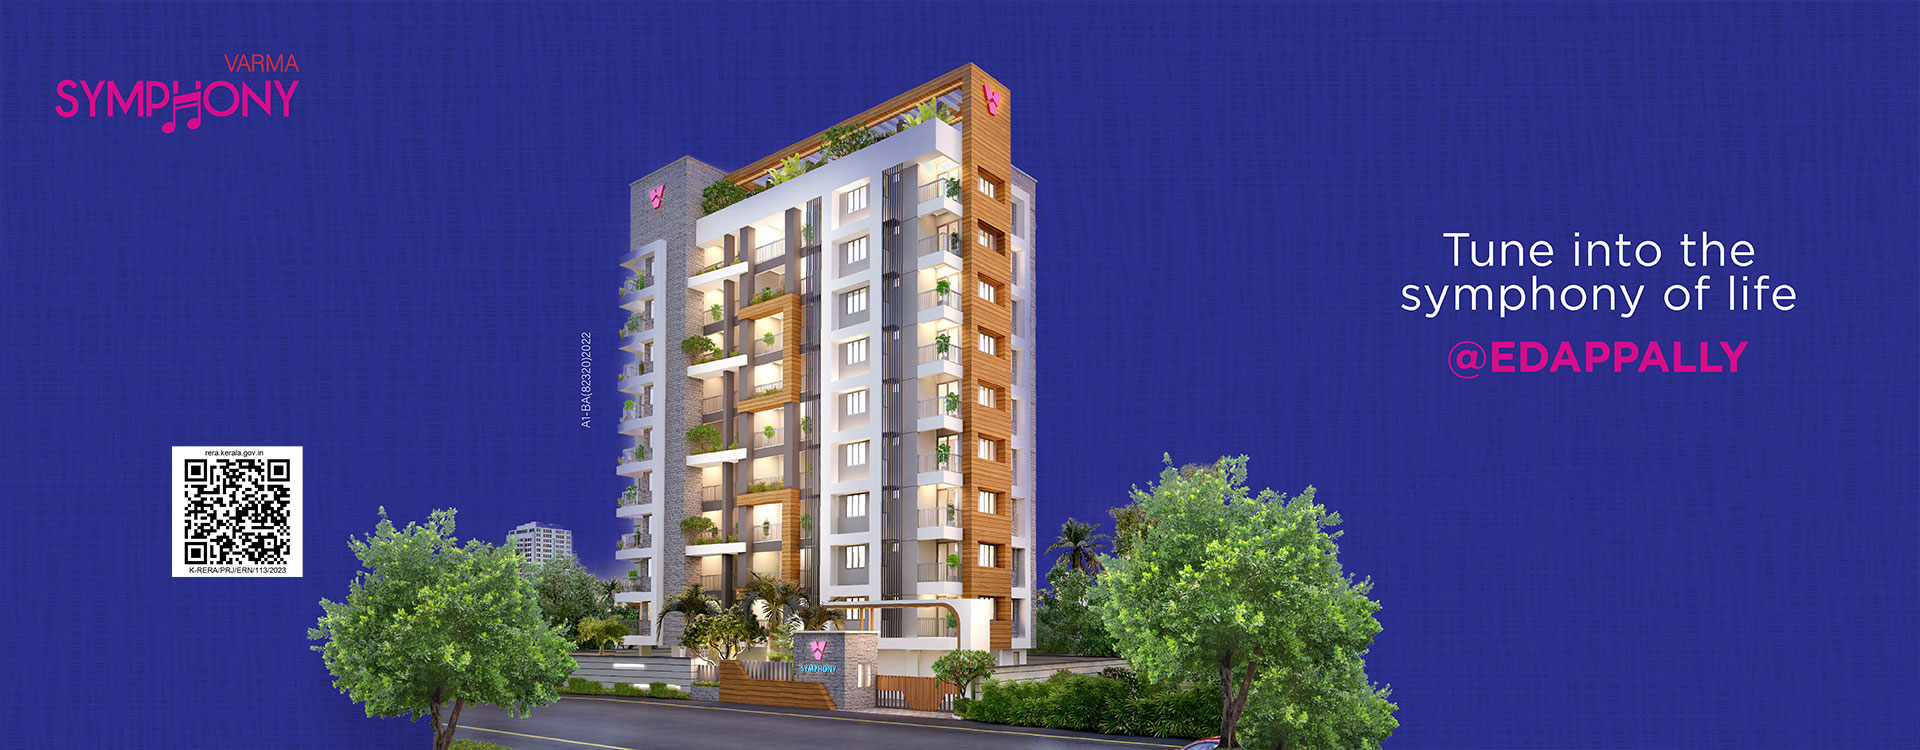 luxury apartments in cochin